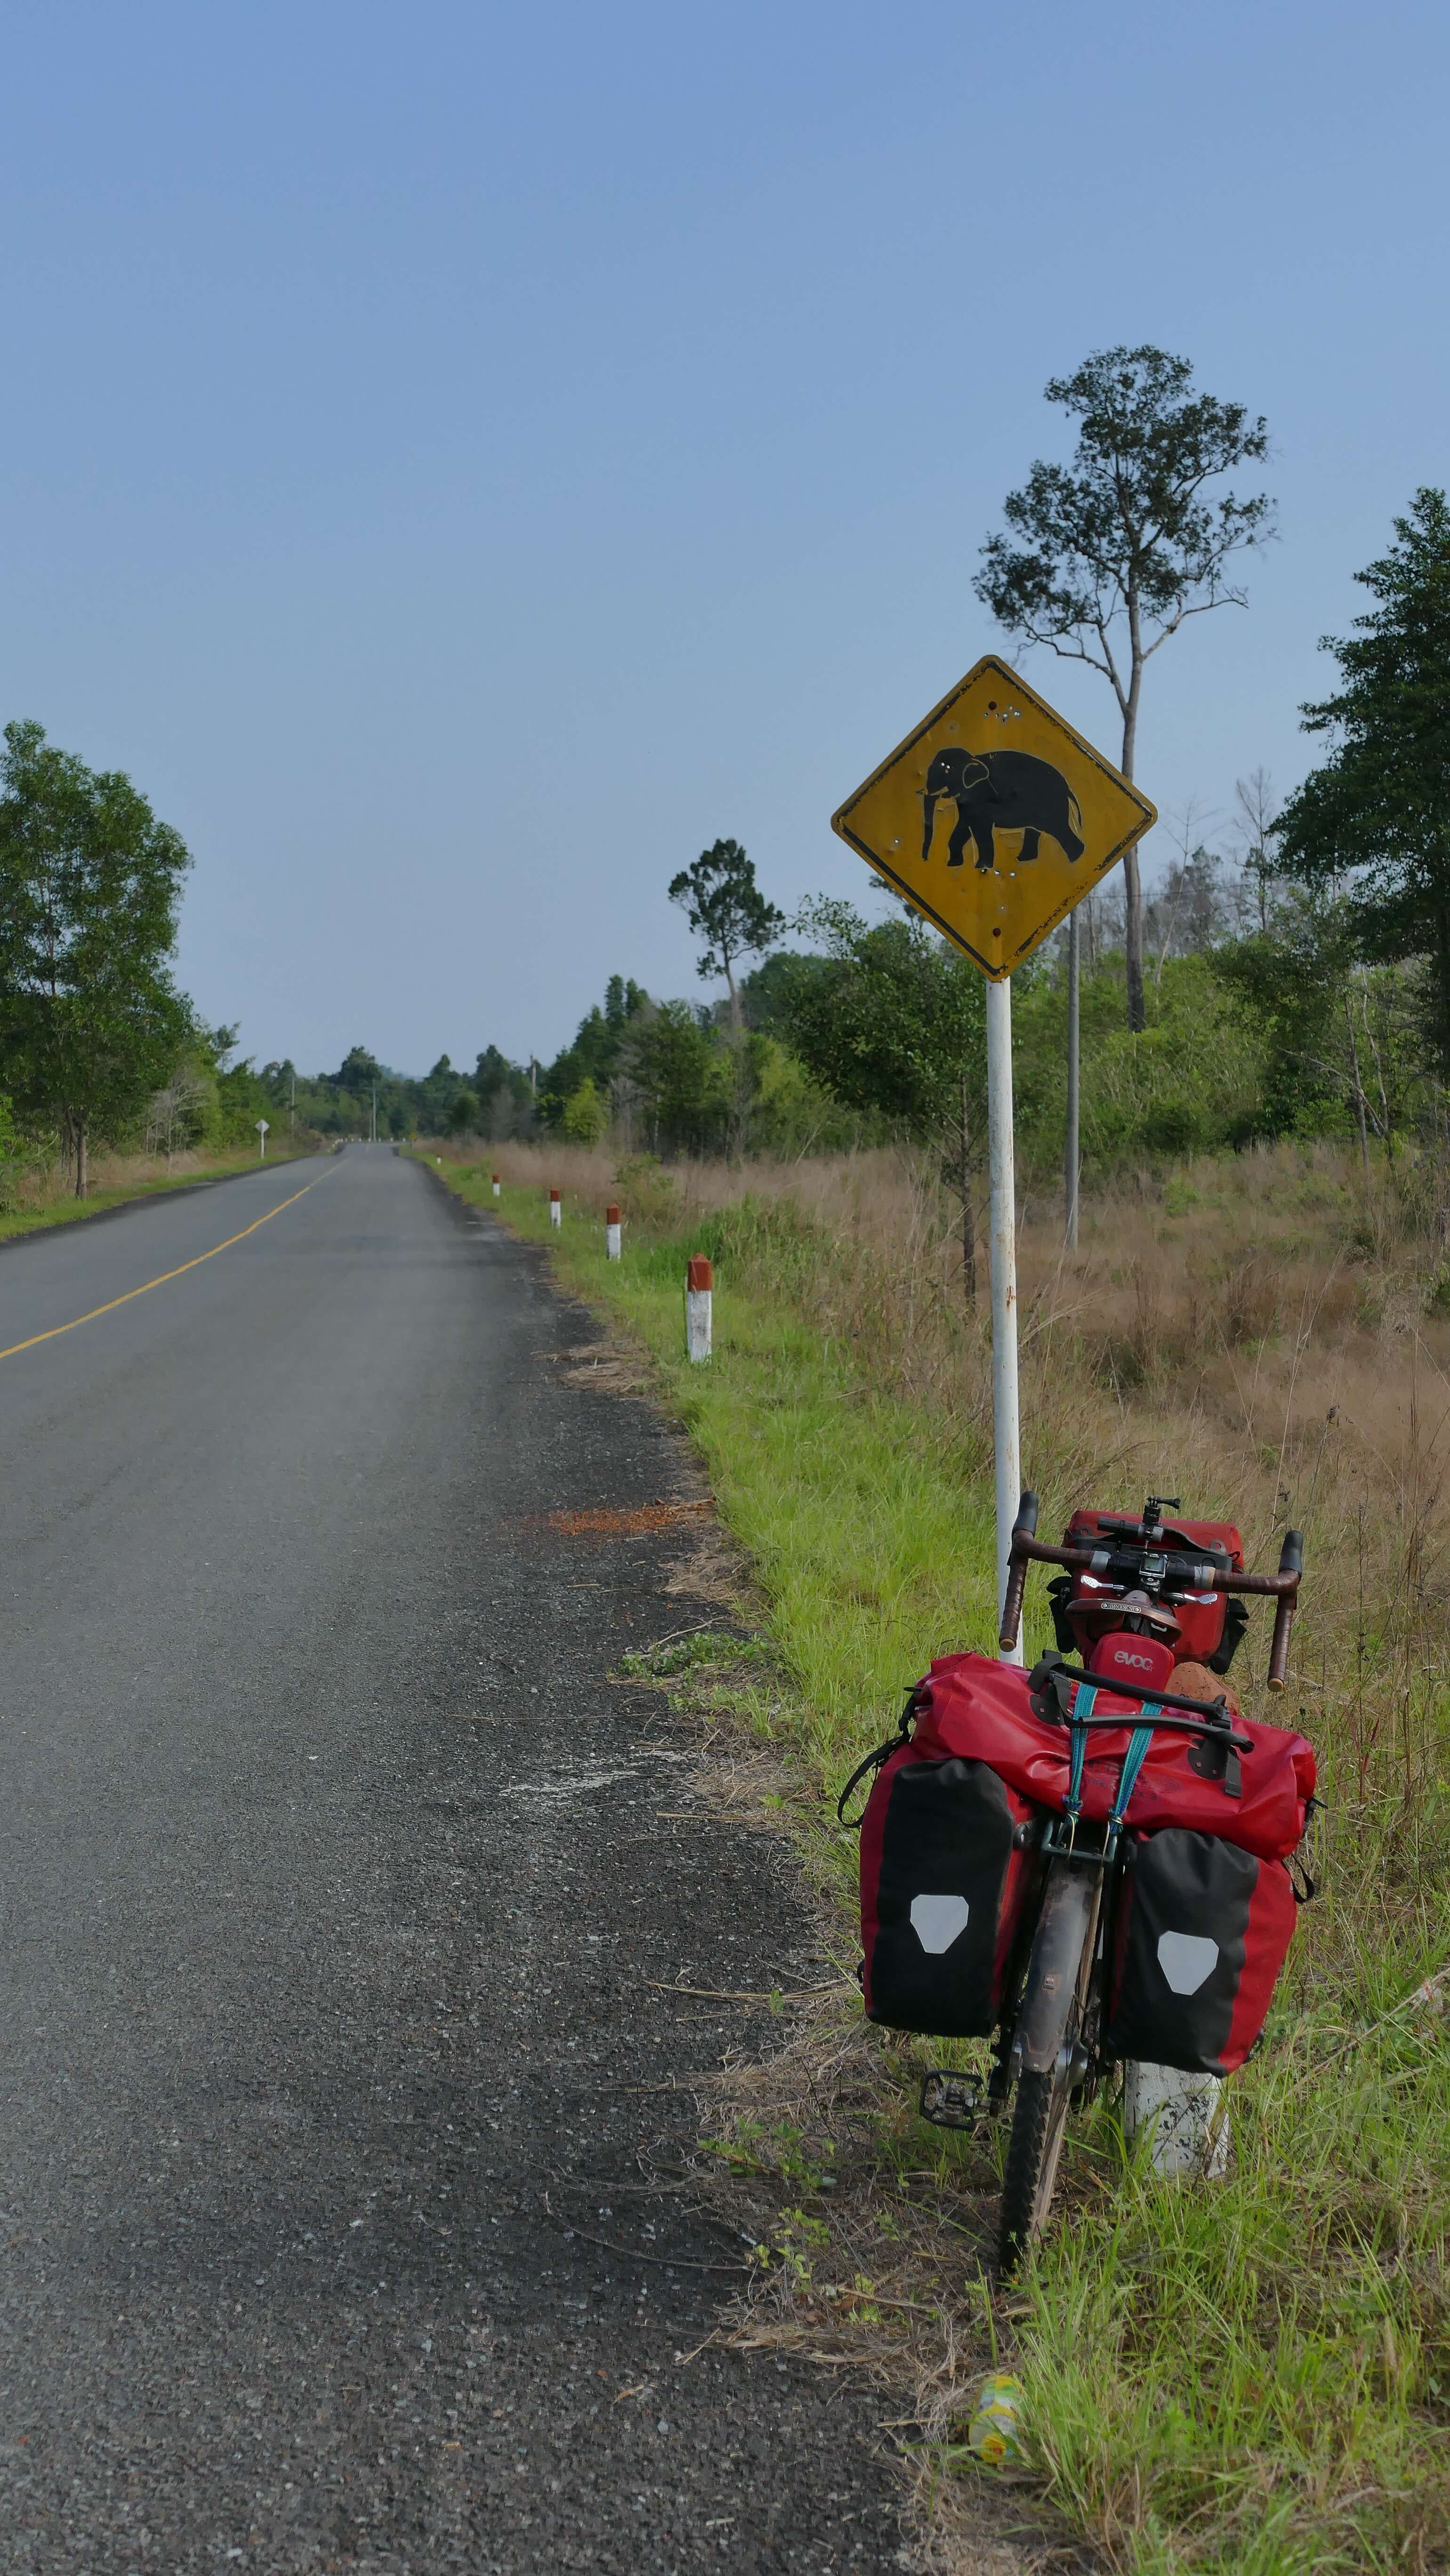 Day 38 (17.03) – to Koh Kong and the Thai border